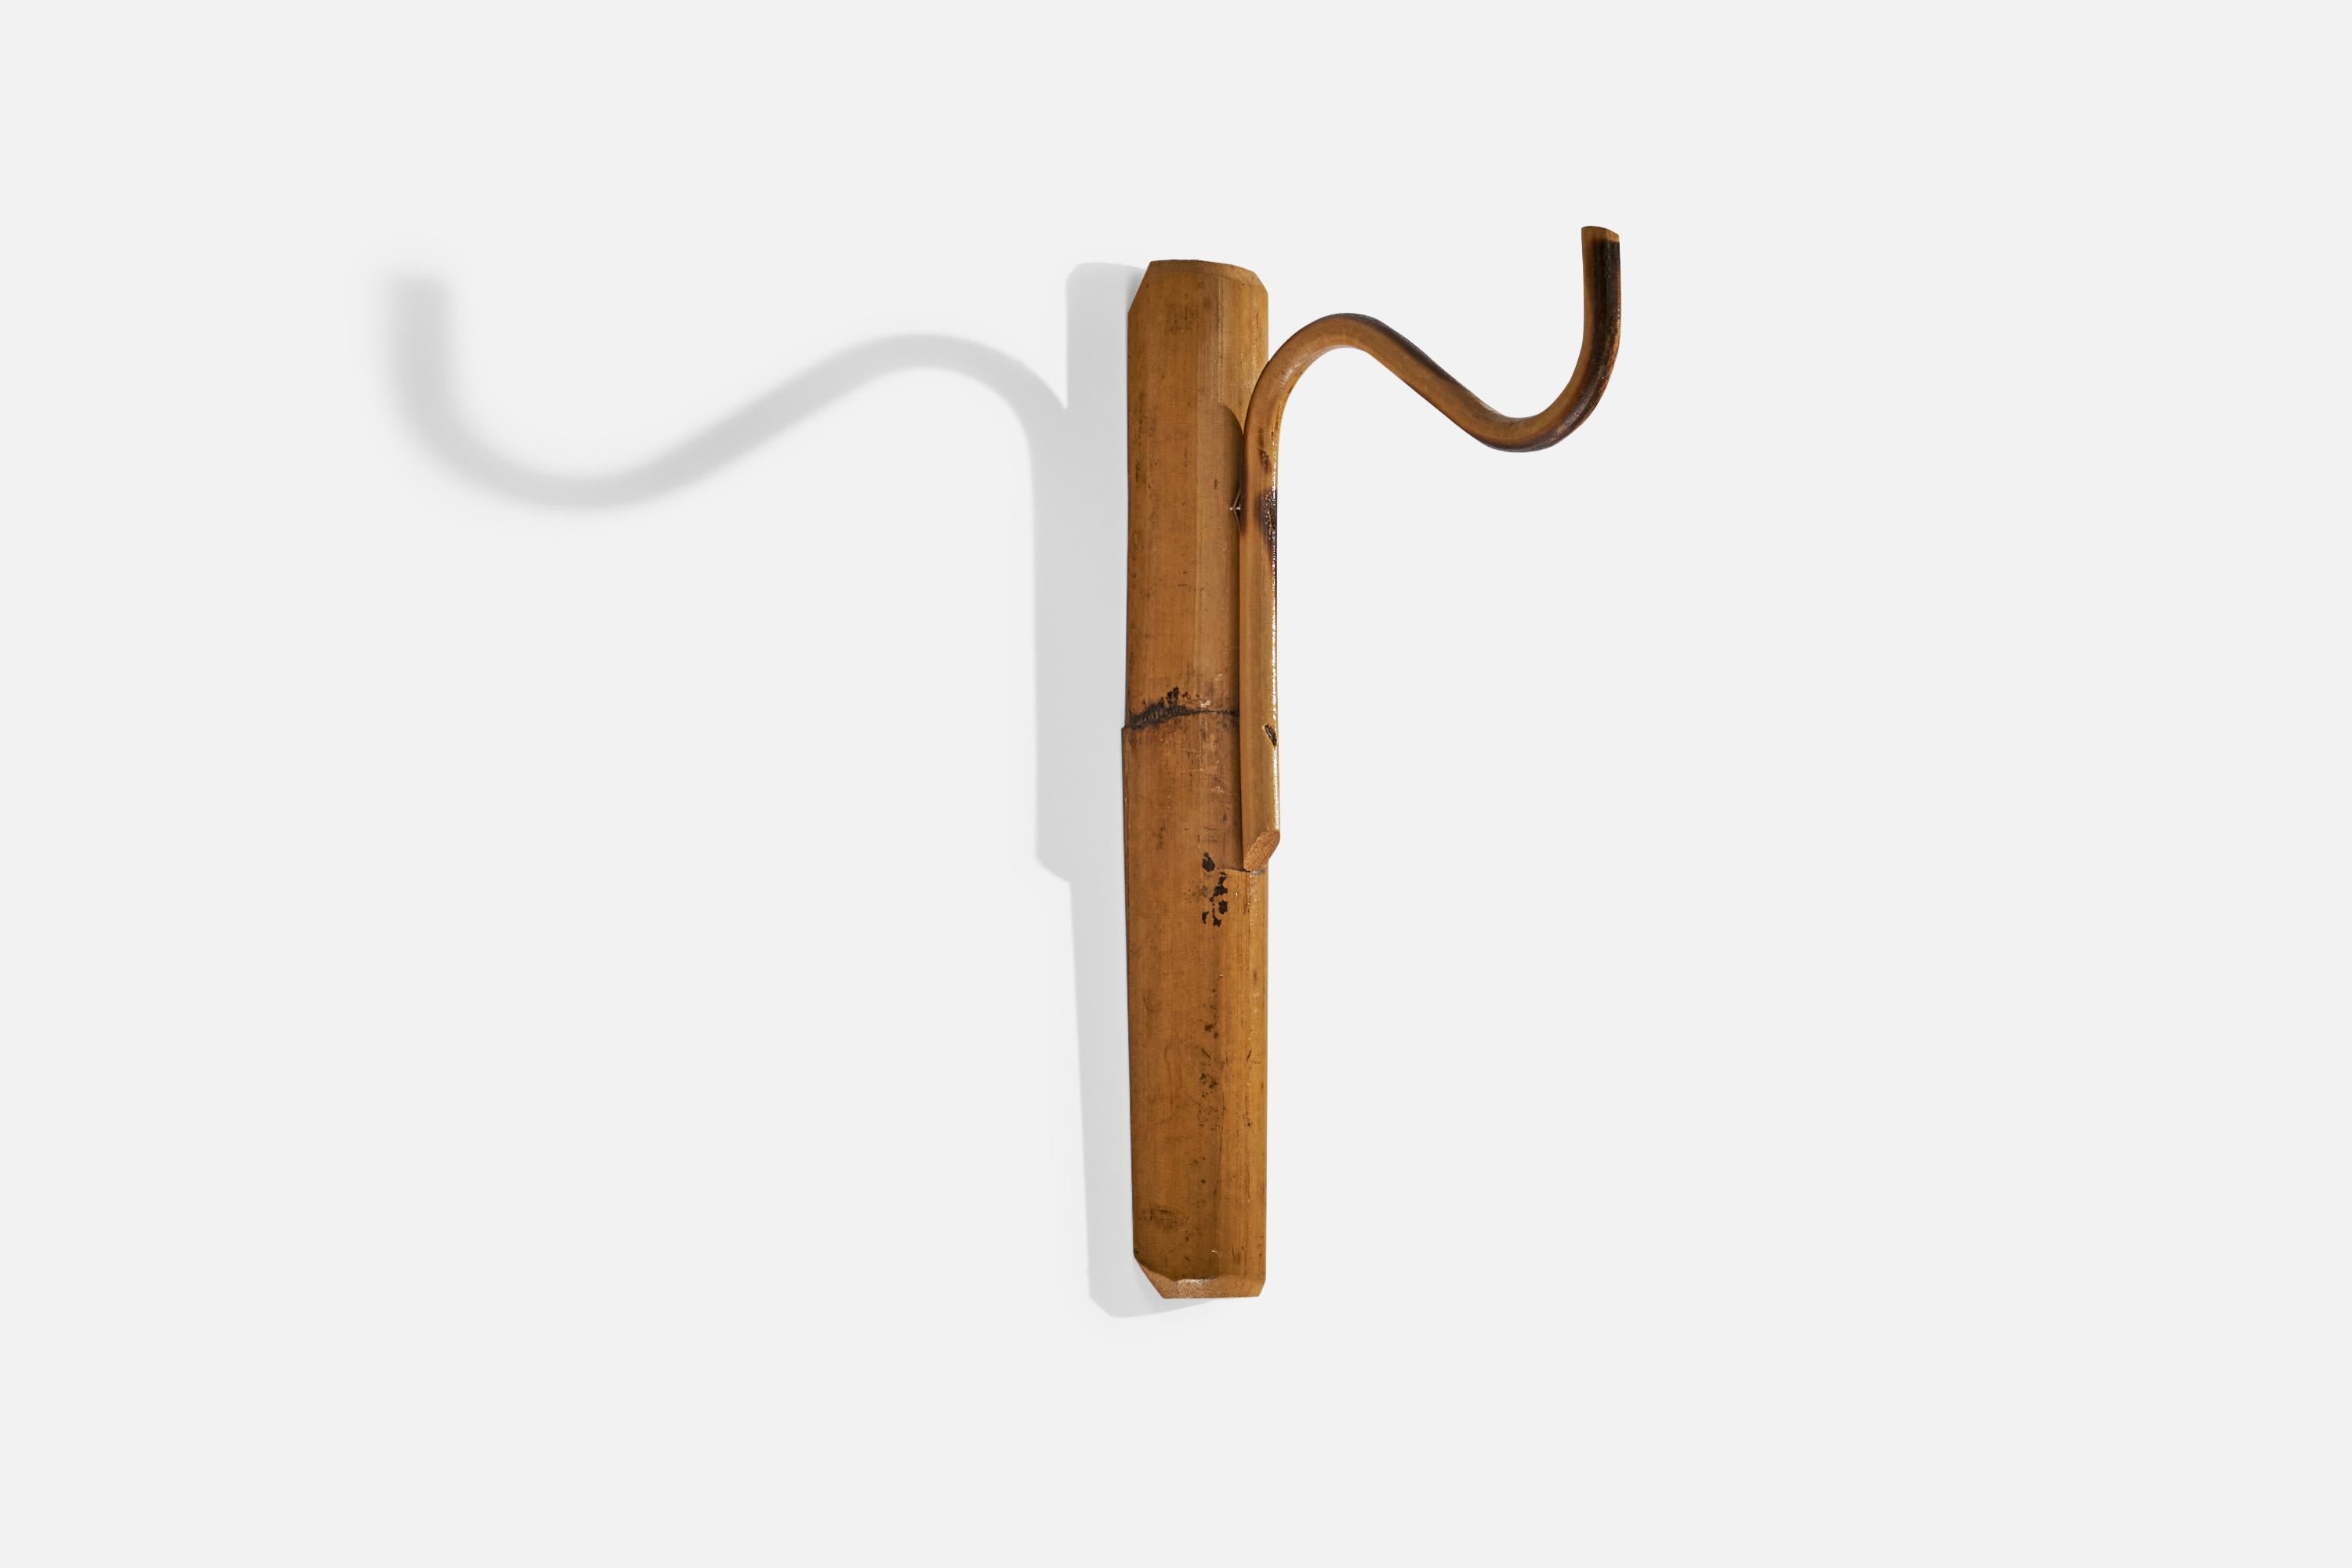 A bamboo coat hanger designer and produced in Italy, c. 1960s.